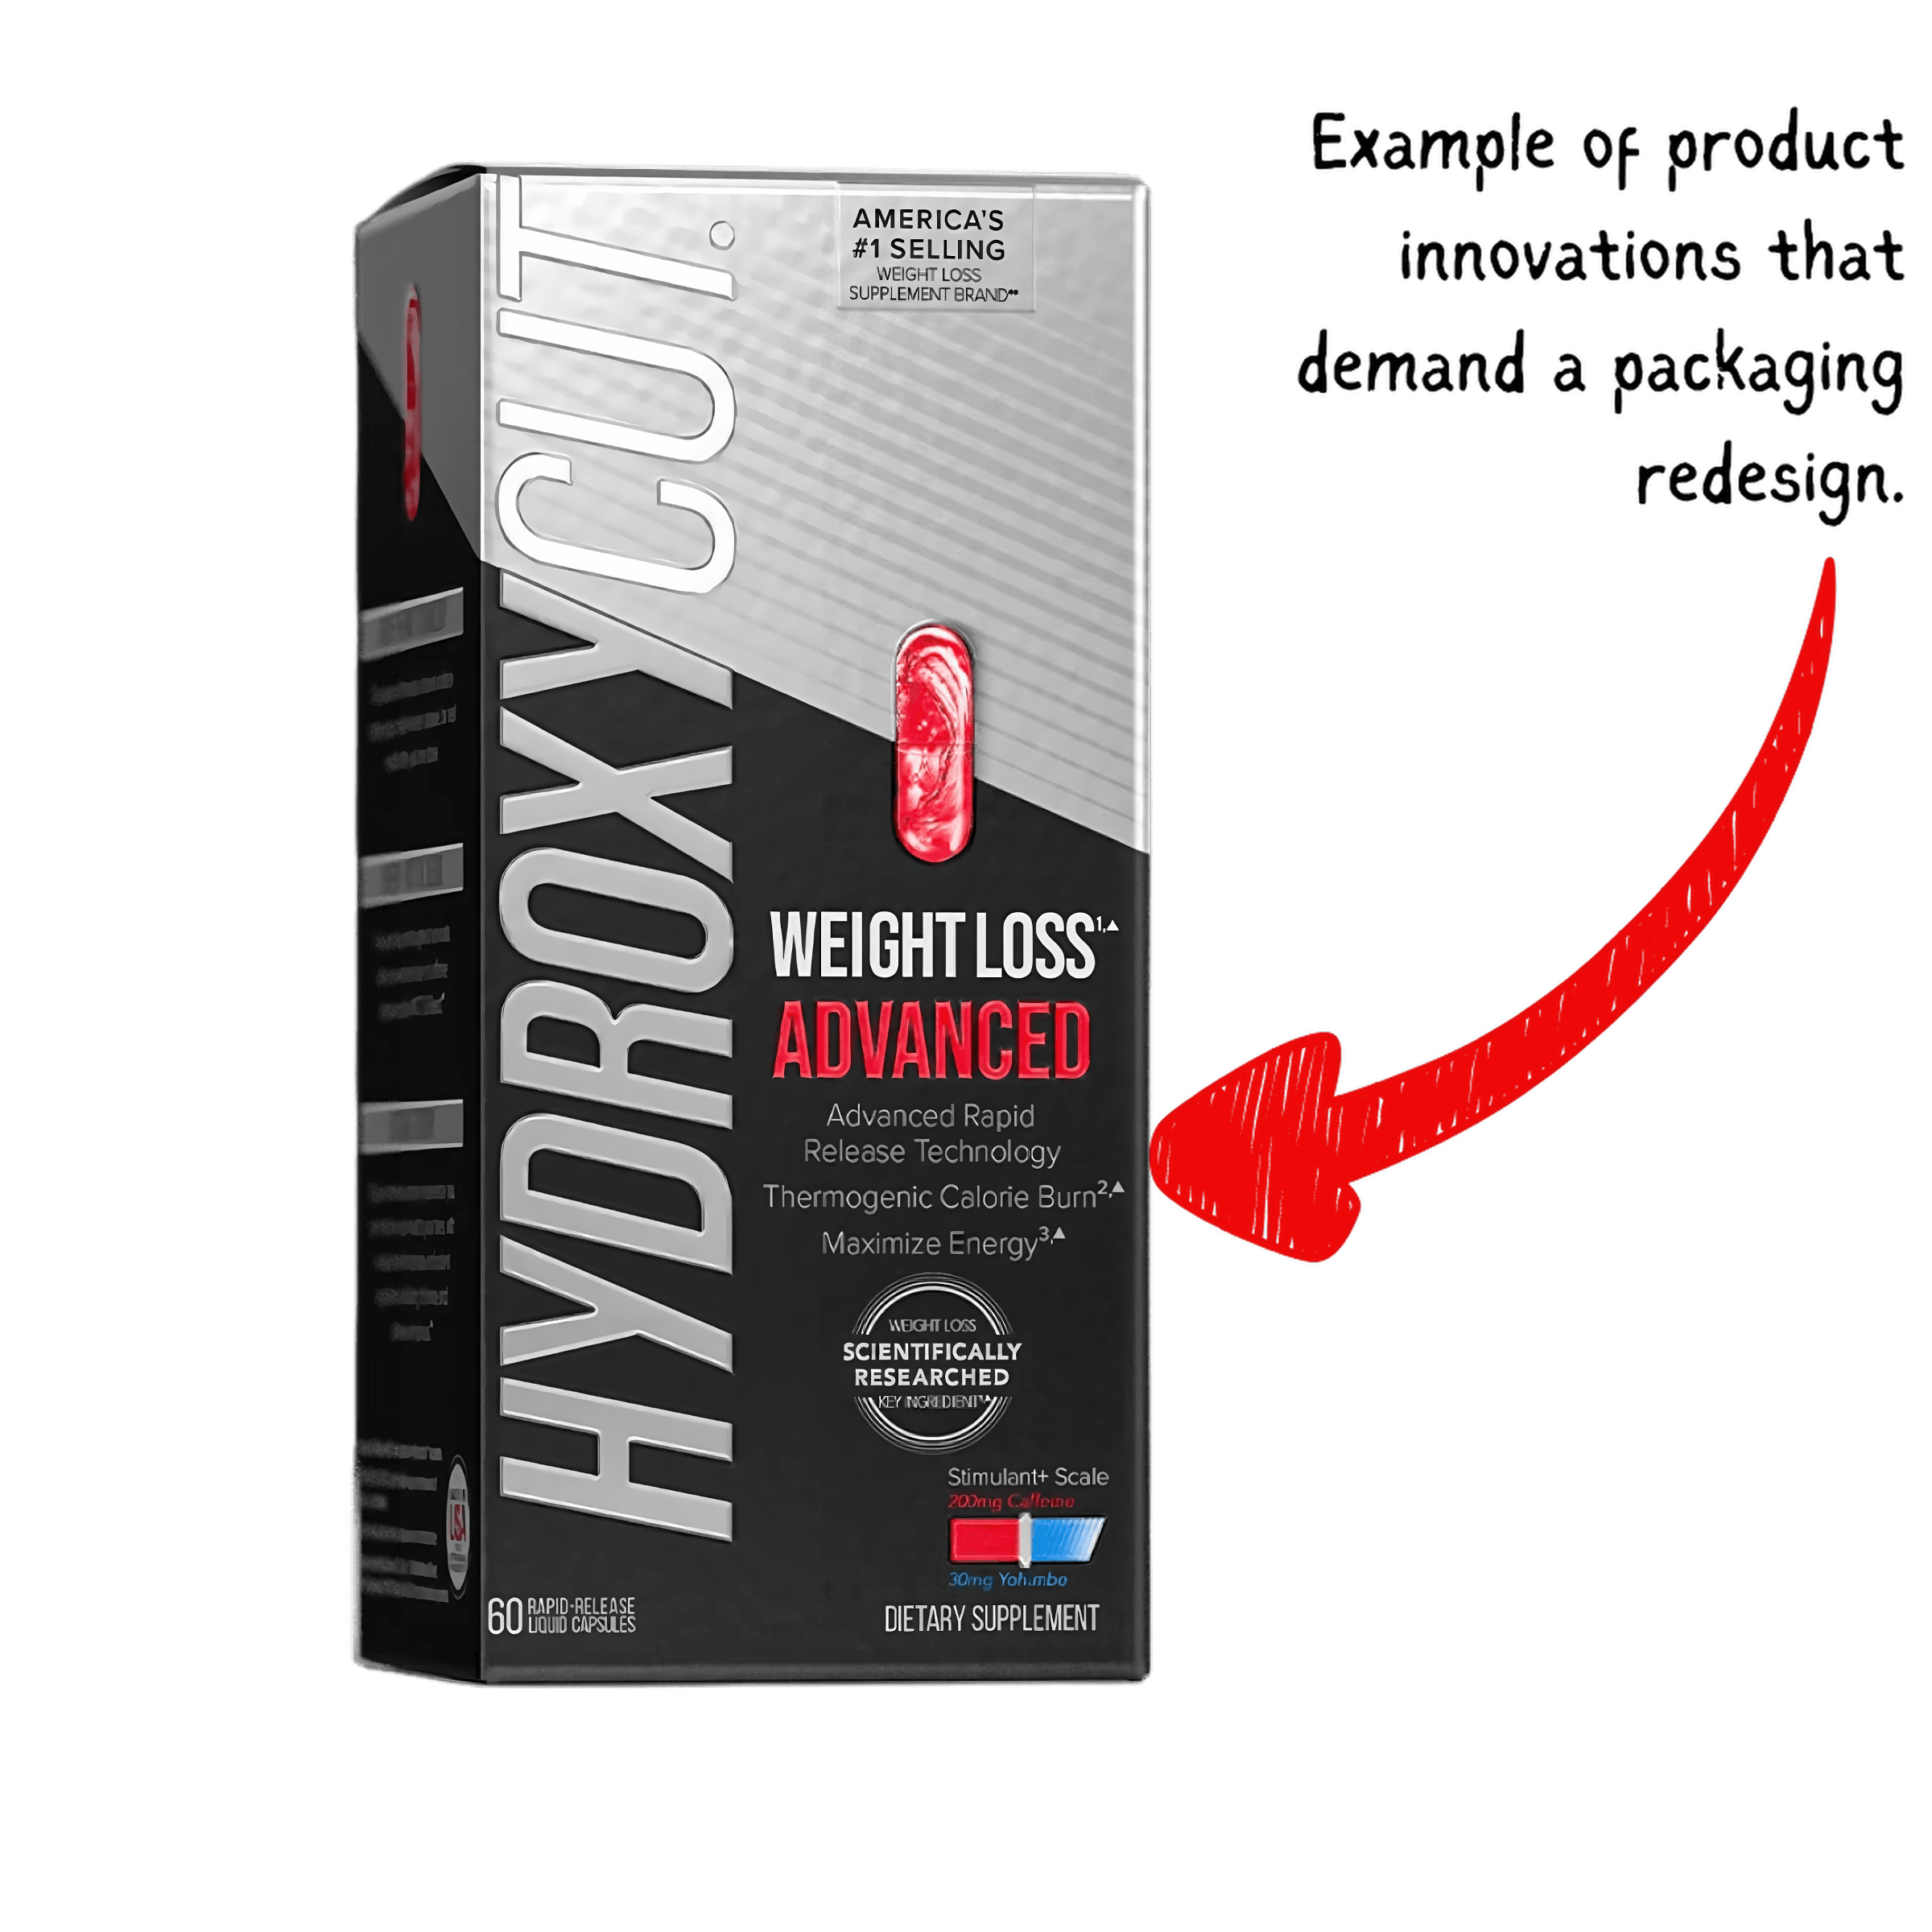 Hydroxycut Advanced Packaging Design